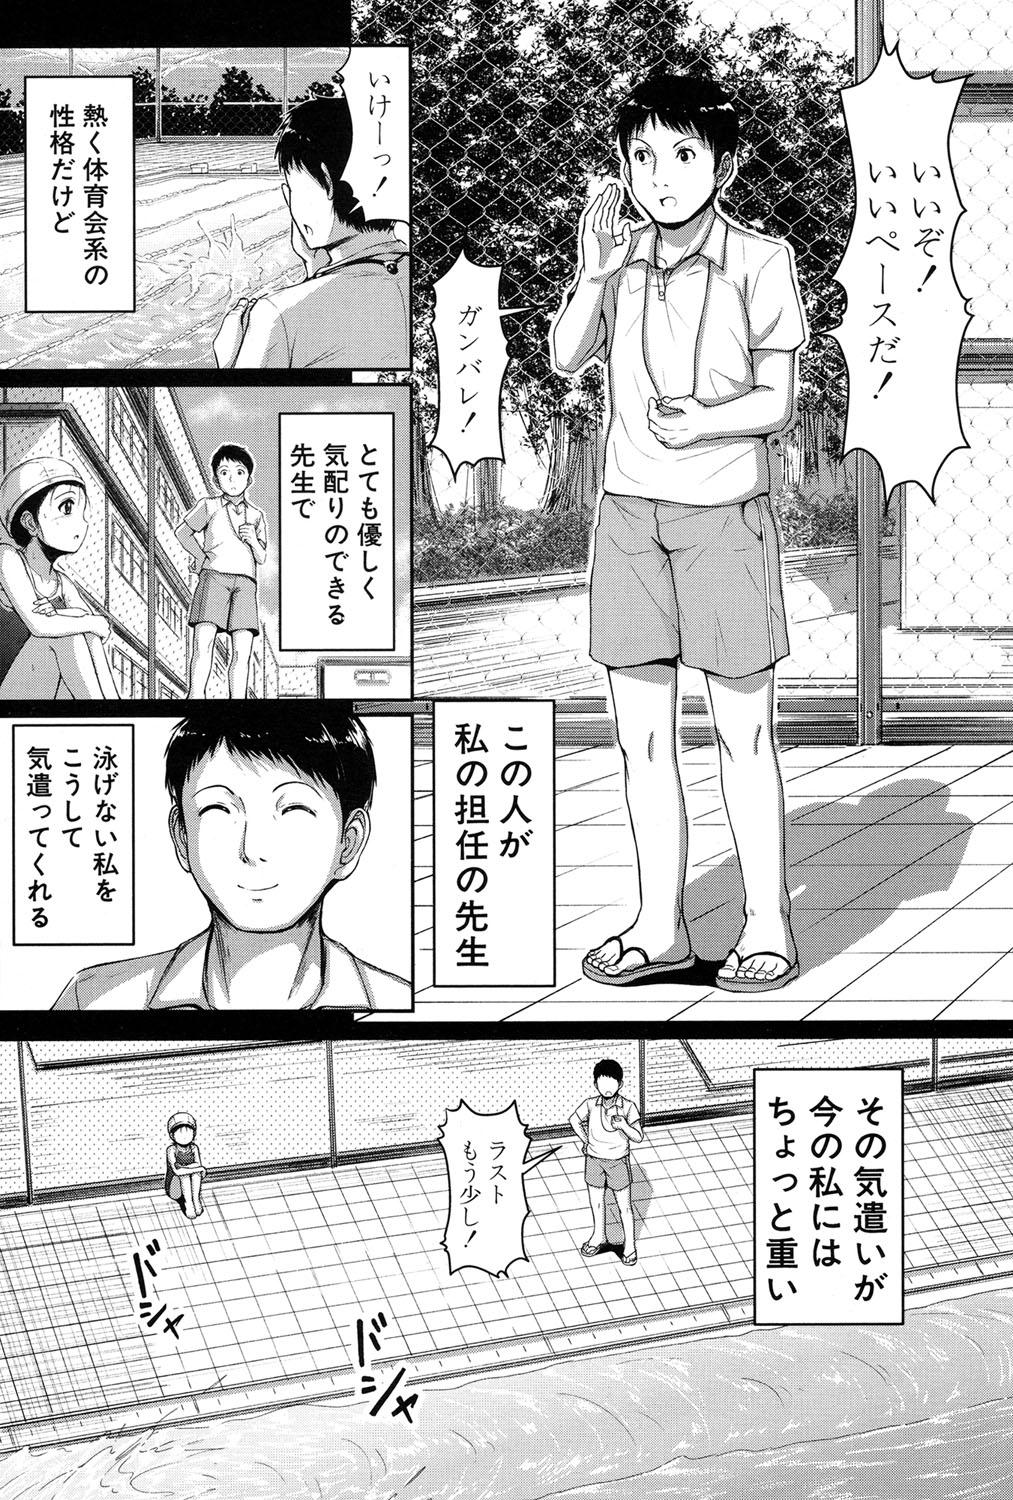 Motel Oyogeru You ni Naritai na - I want to be able to swim. Hot Cunt - Page 4